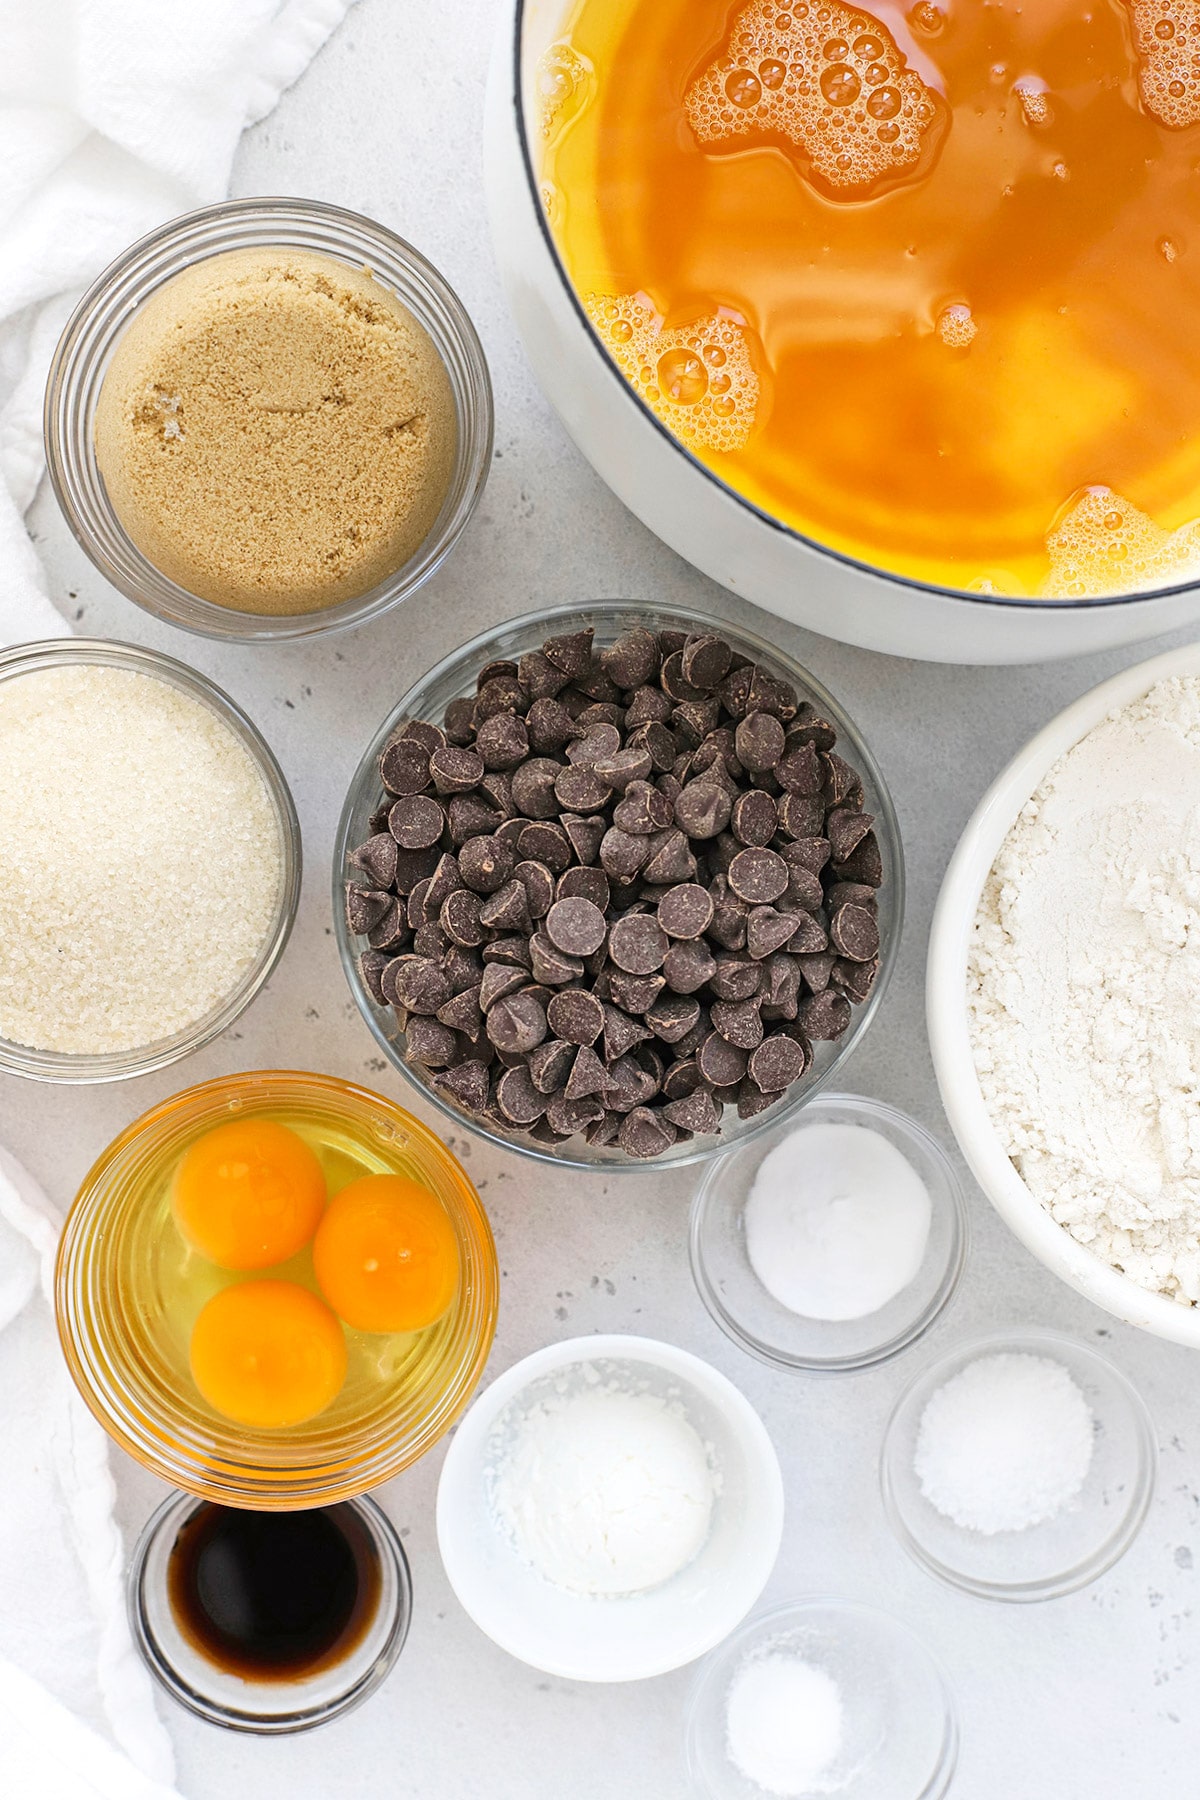 Overhead view of ingredients for gluten-free nutella stuffed chocolate chip cookies